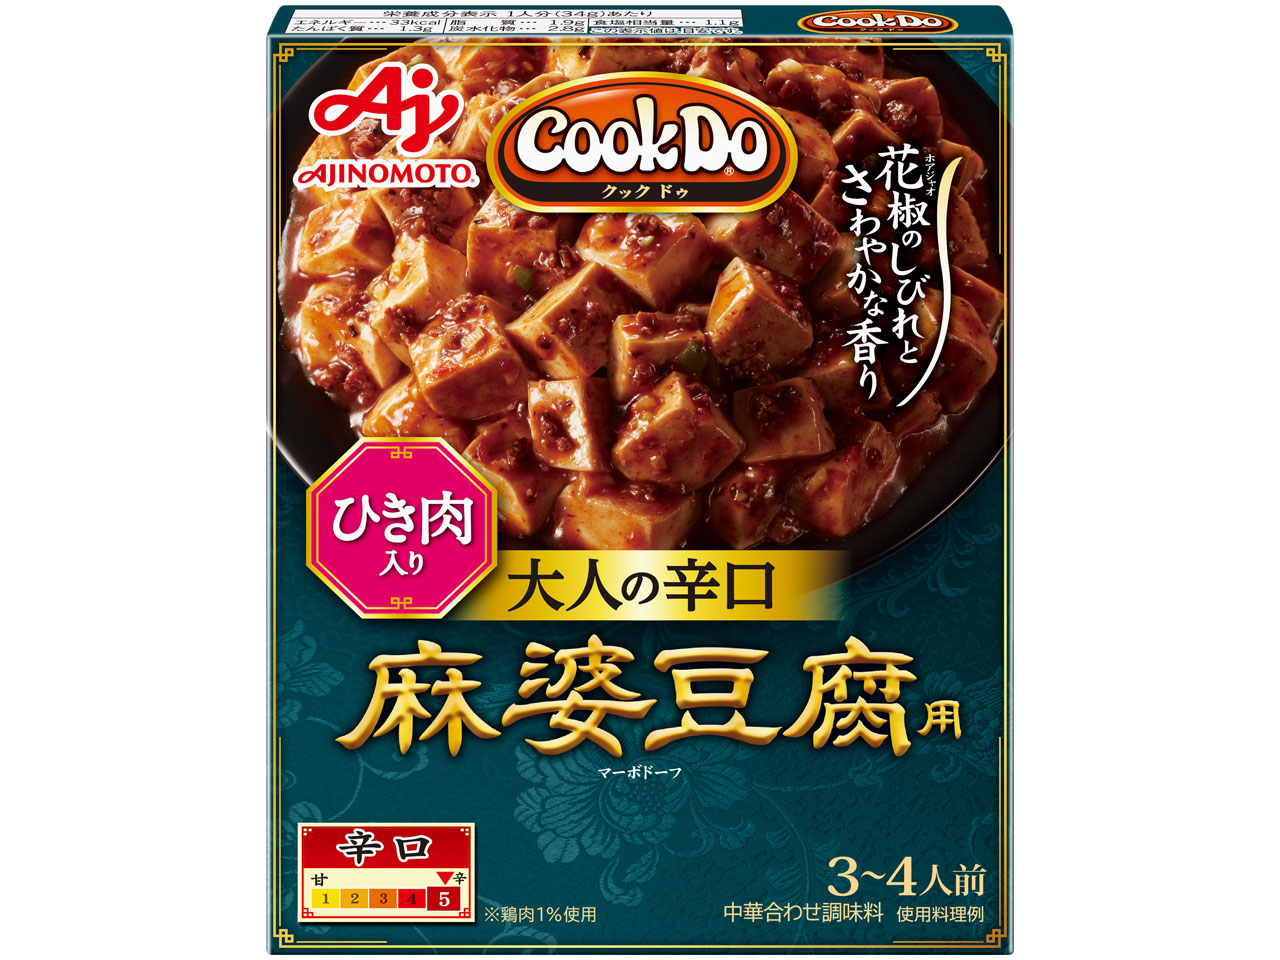 「Cook Do」ひき肉入り麻婆豆腐用 大人の辛口